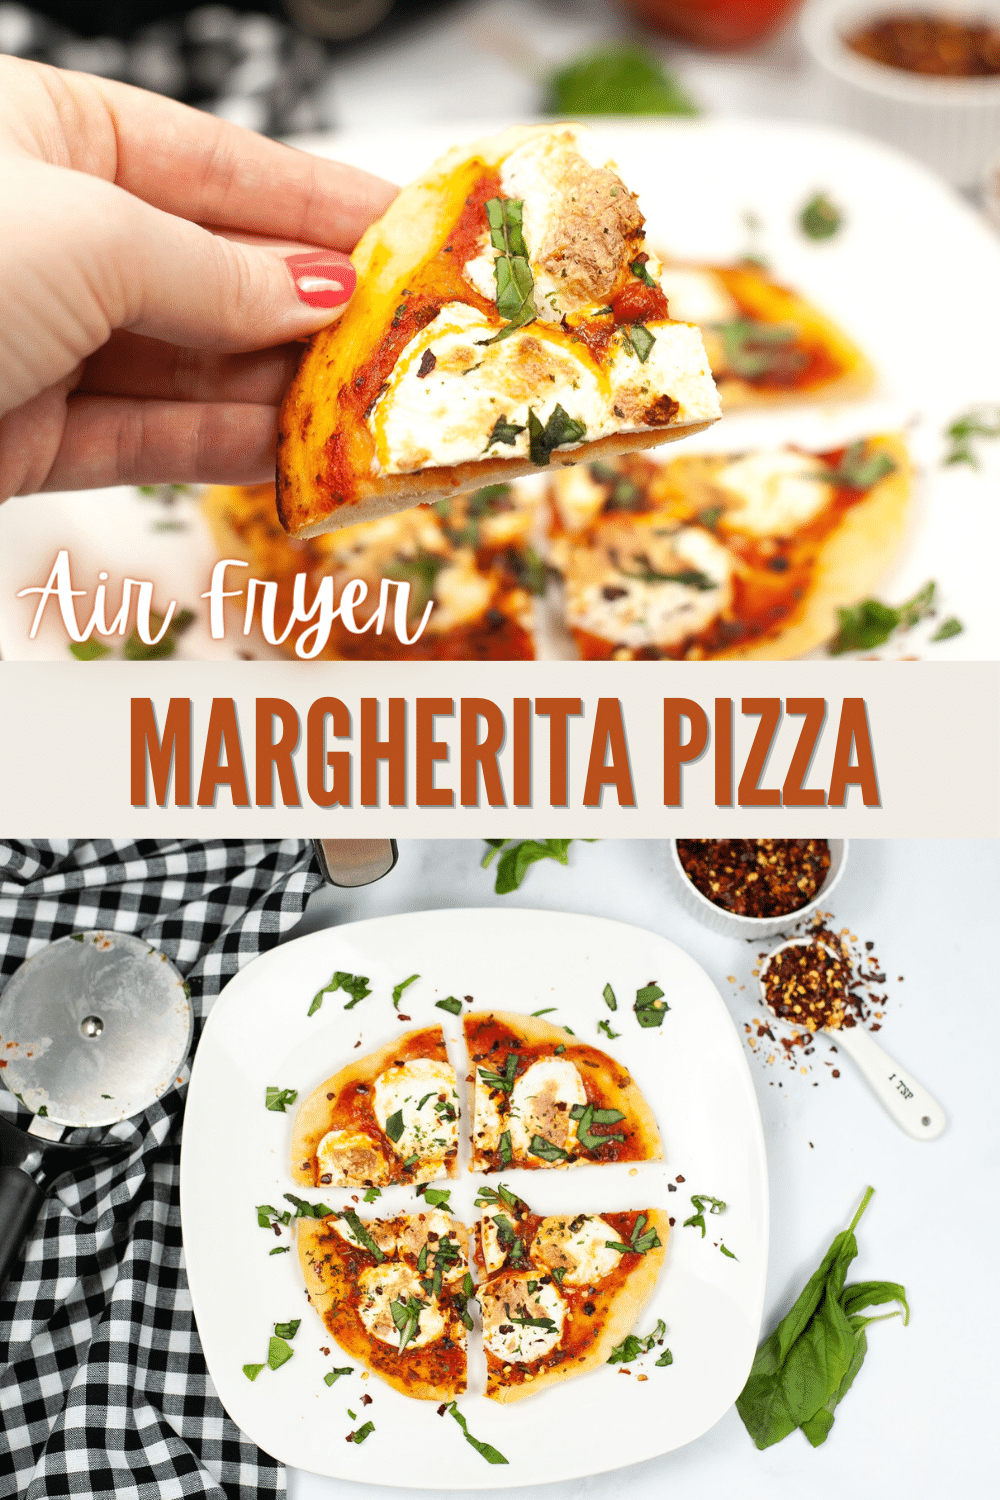 Air Fryer Margherita Pizza is the best way to have pizza without all the hassle! This air-fried pizza is going to be a family favorite. #airfryer #margheritapizza #pizza #recipe via @wondermomwannab